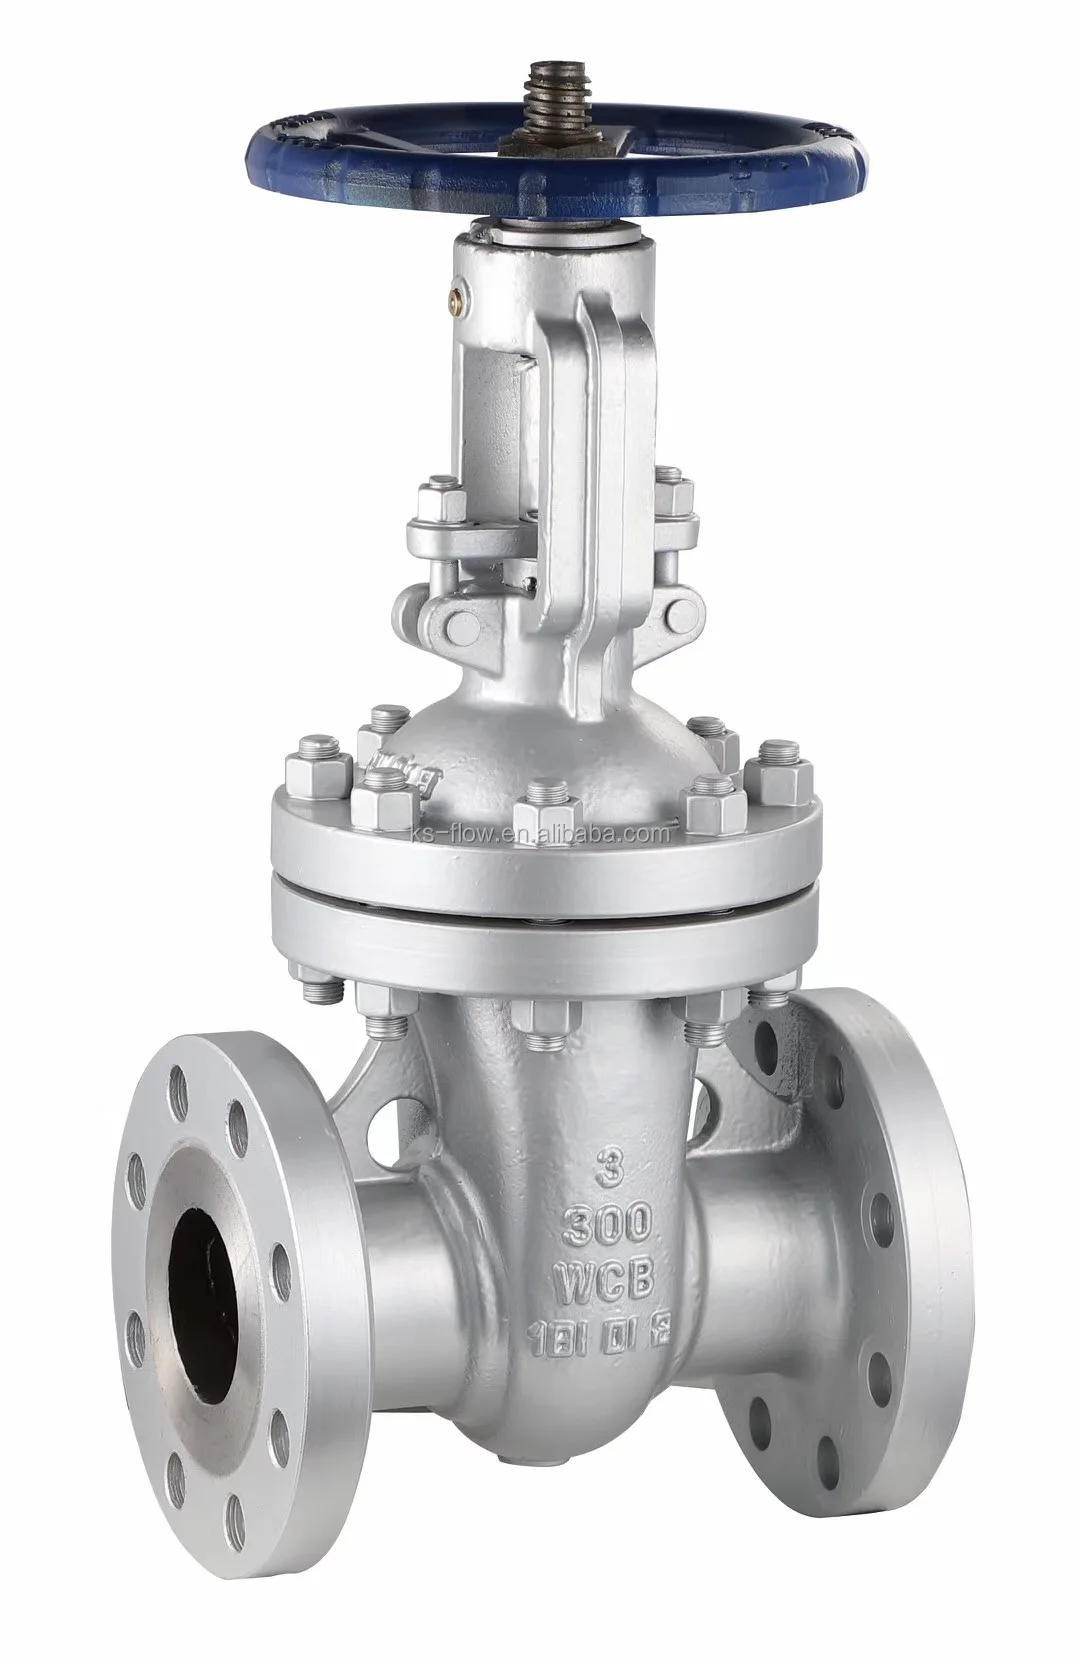 A216 Gr Wcb Dn1200 Electric Actuated Gate Valve 6 Inch - Buy Dn1200